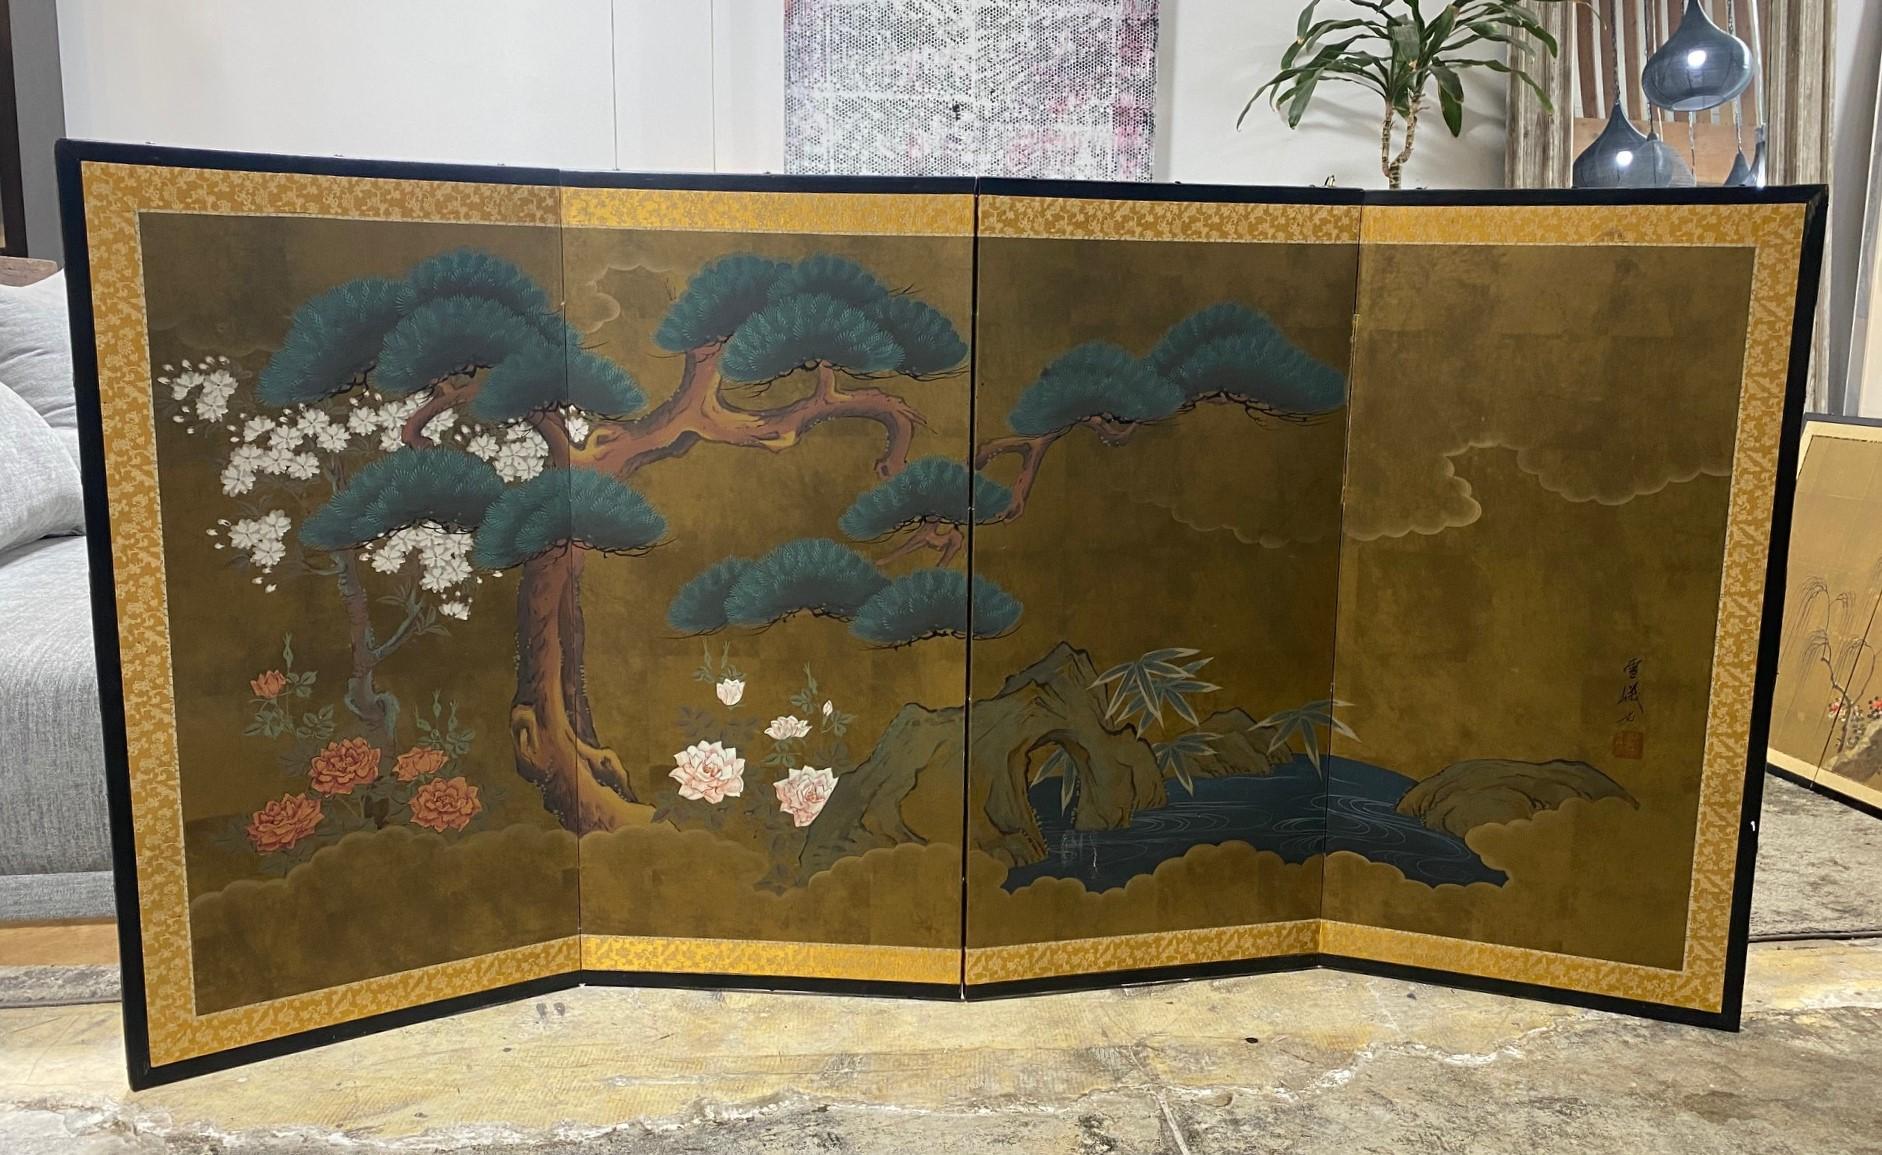 A gorgeous hand-painted four-panel Japanese/Asian Byobu folding screen depicting a nature landscape scene with blooming/ blossoming flowers and a venerable pine tree with limbs stretching out over a flowing river/lake. The deep, rich colors, gold